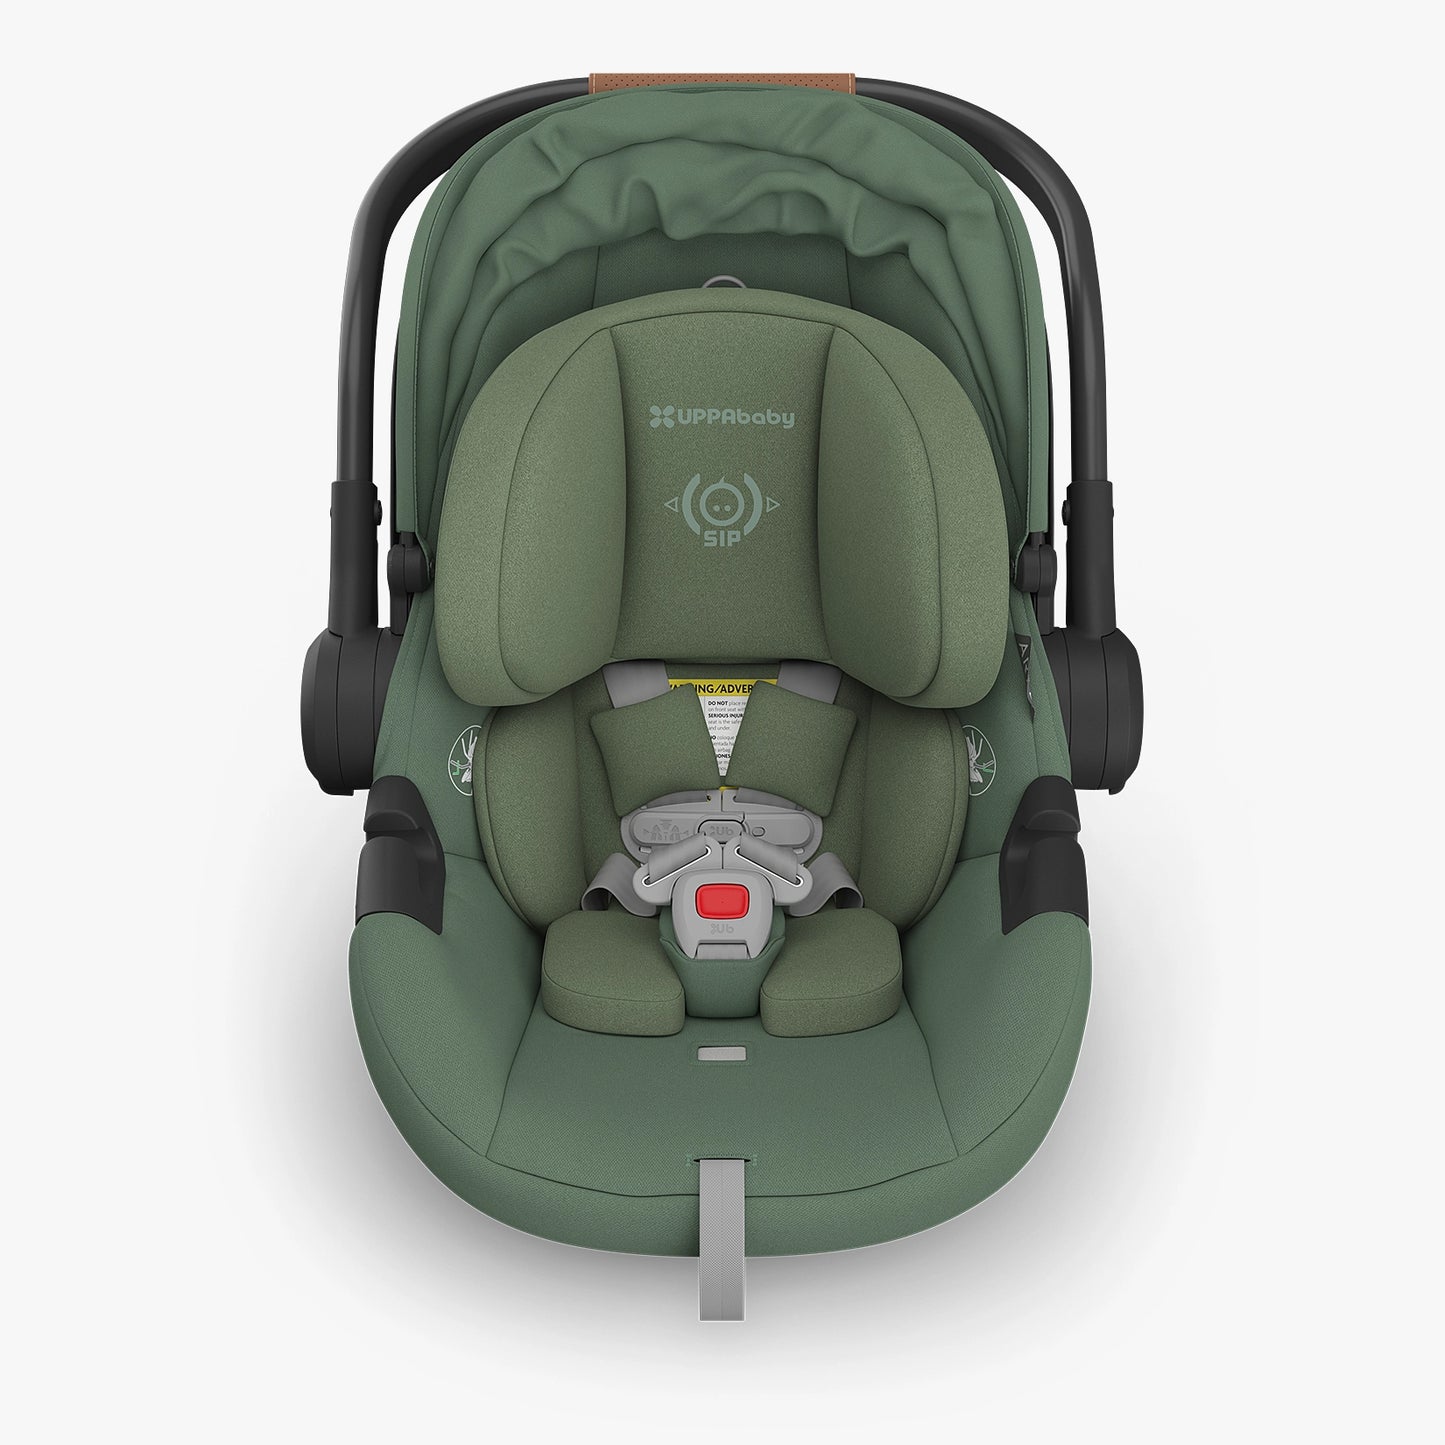 ARIA Infant Car Seat - GWEN (BACKORDERED UNTIL JULY)  - DROPSHIP ITEM - PLEASE ALLOW ONE WEEK FOR PROCESSING